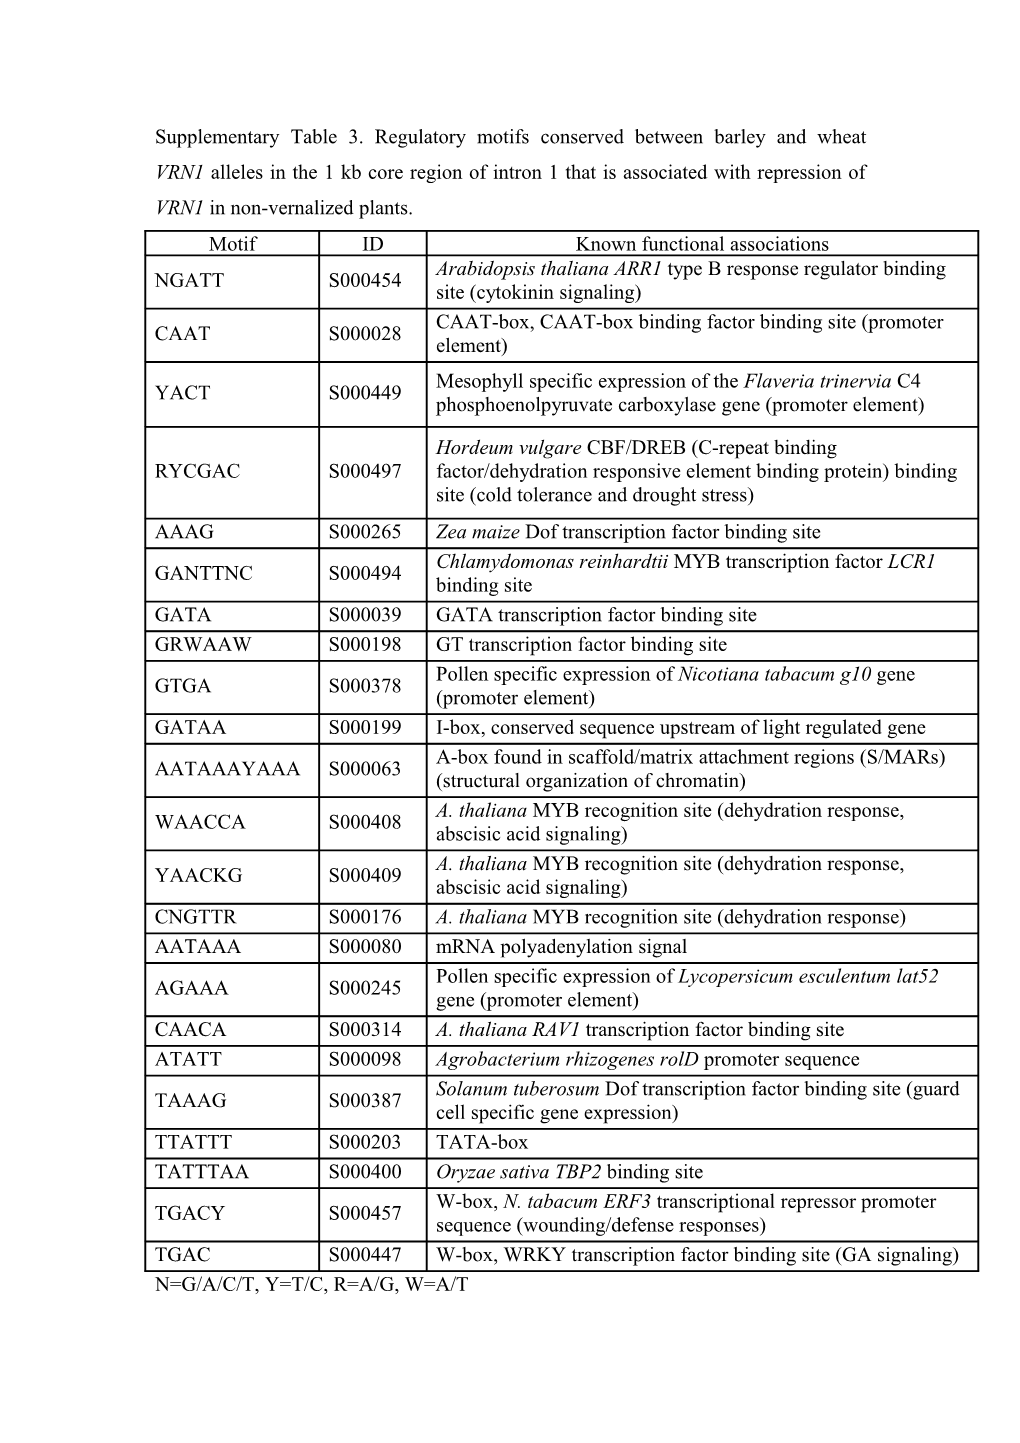 Supplementary Table 3. Regulatory Motifs Conserved Between Barley and Wheat VRN1 Alleles